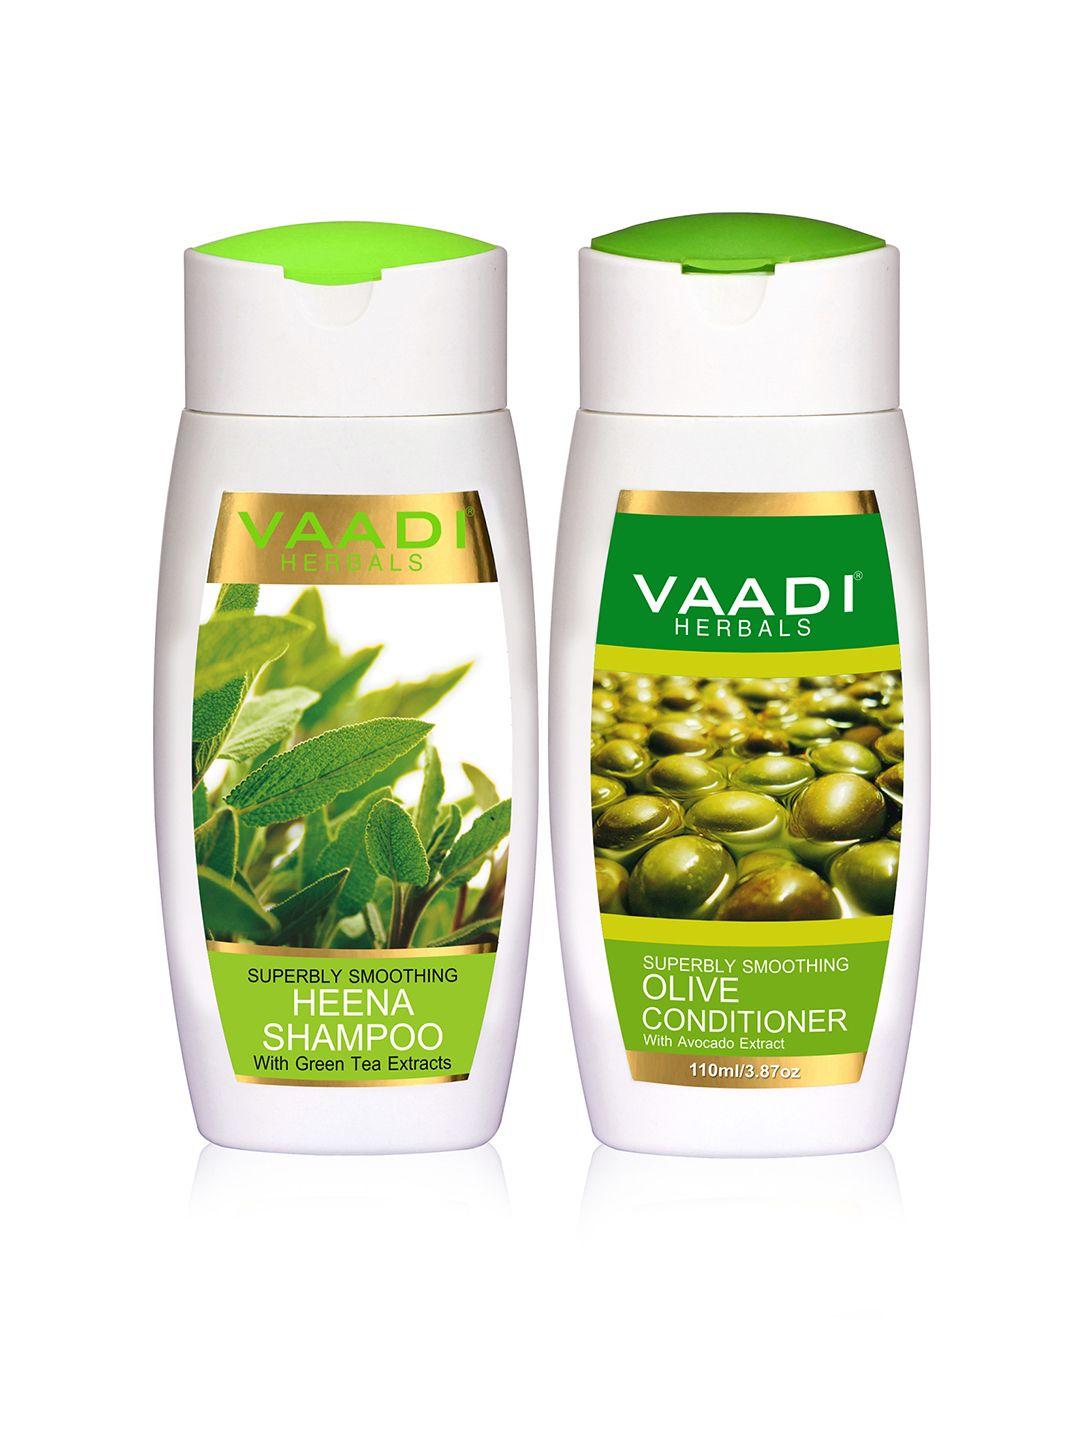 vaadi herbals set of superbly smoothing heena shampoo & olive conditioner - 110ml each